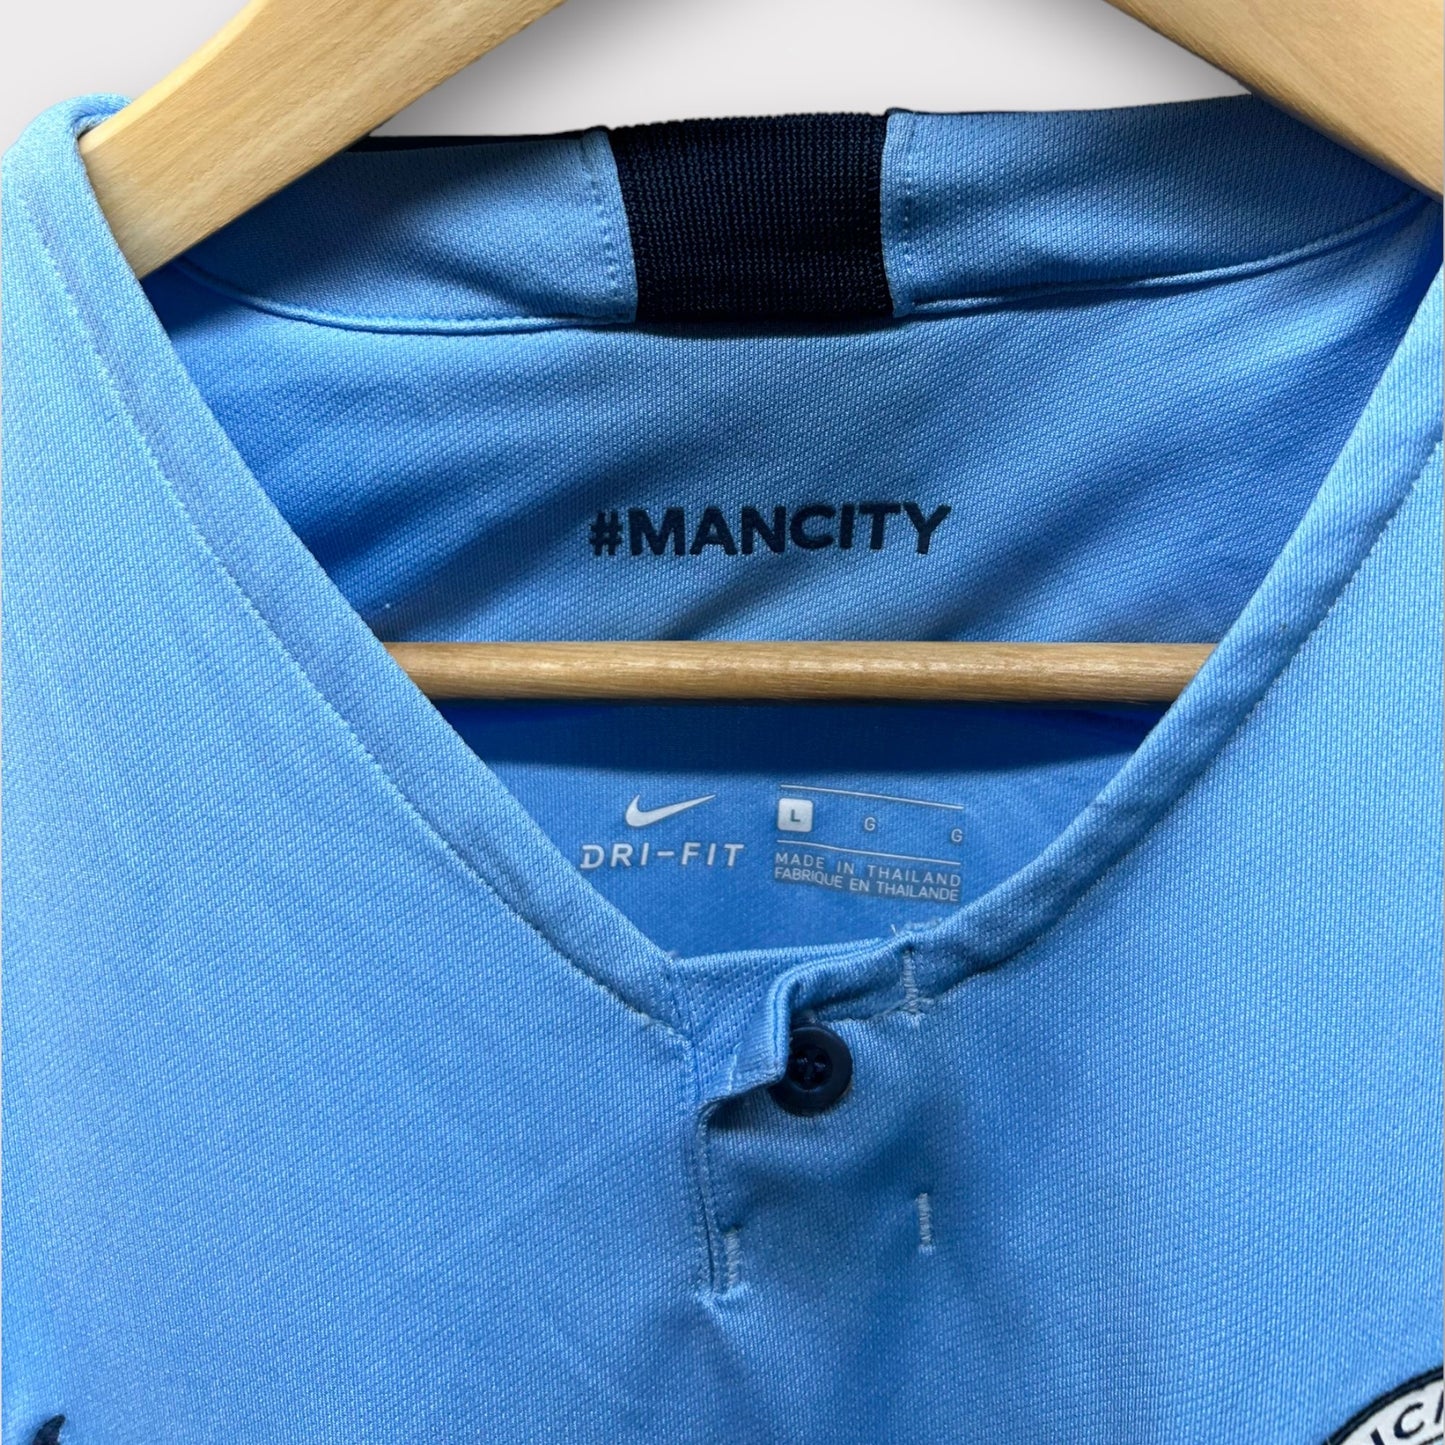 Manchester City 2018/19 Home Shirt (Large)